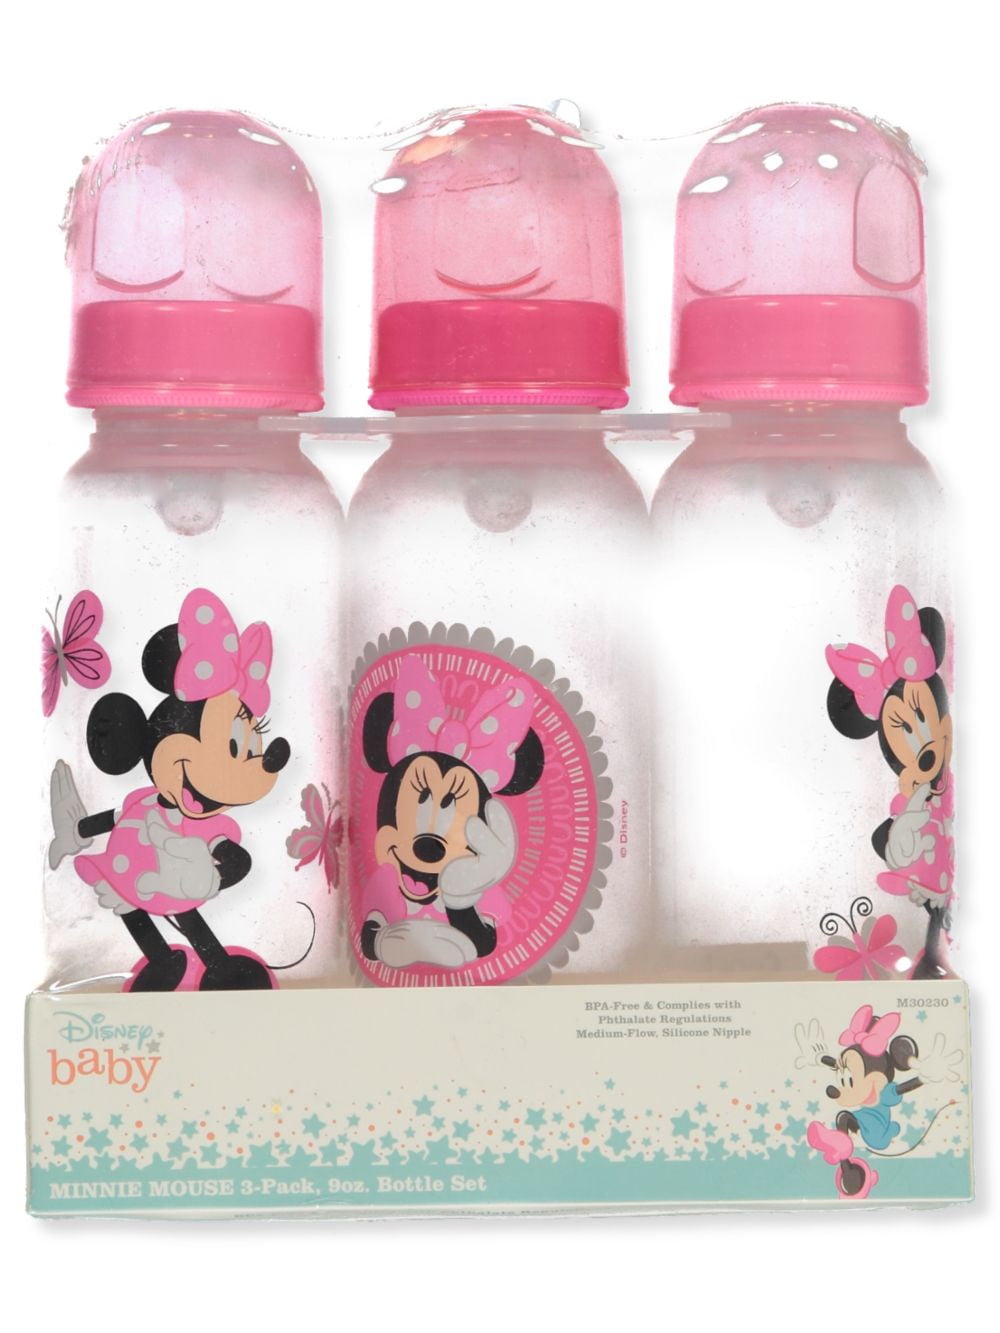 Cars Spiderman Collapsible Water Bottle Disney Princess Minnie Mouse